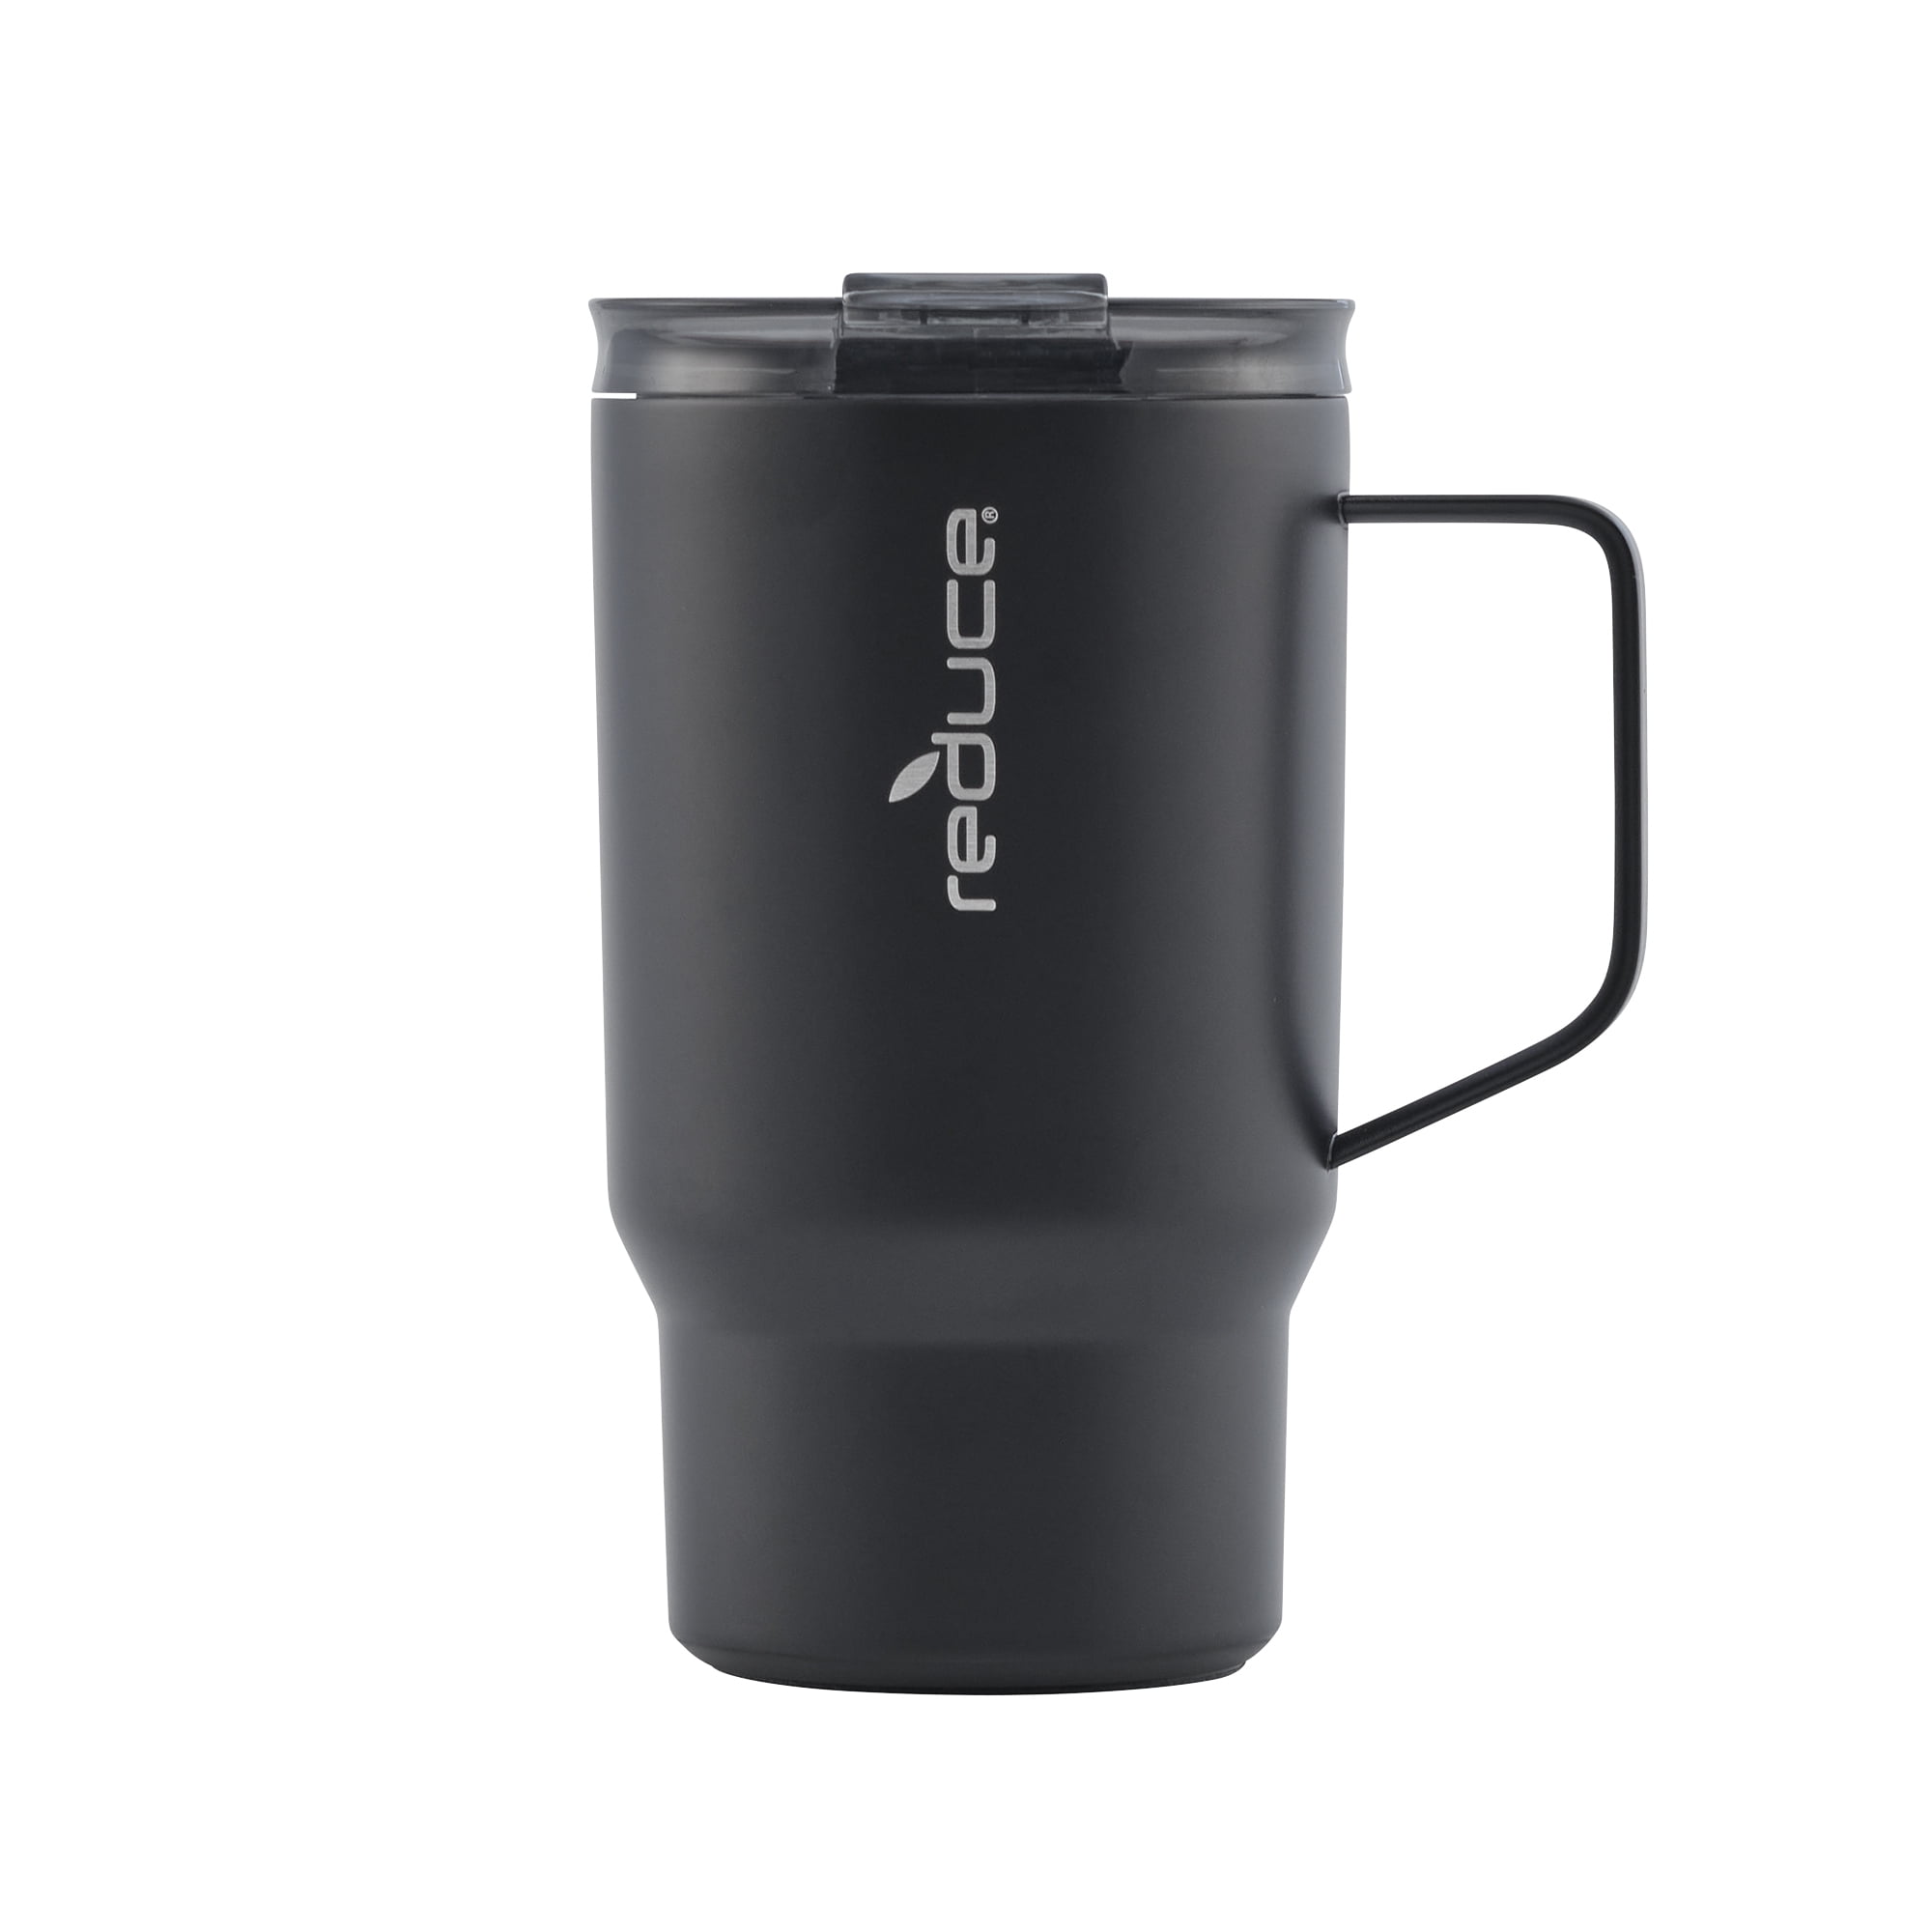 Reduce Travel Coffee Mug, 18 oz - Insulated Mug for Hot Tea, Coffee and  Other Hot Drinks - With Flo-…See more Reduce Travel Coffee Mug, 18 oz 